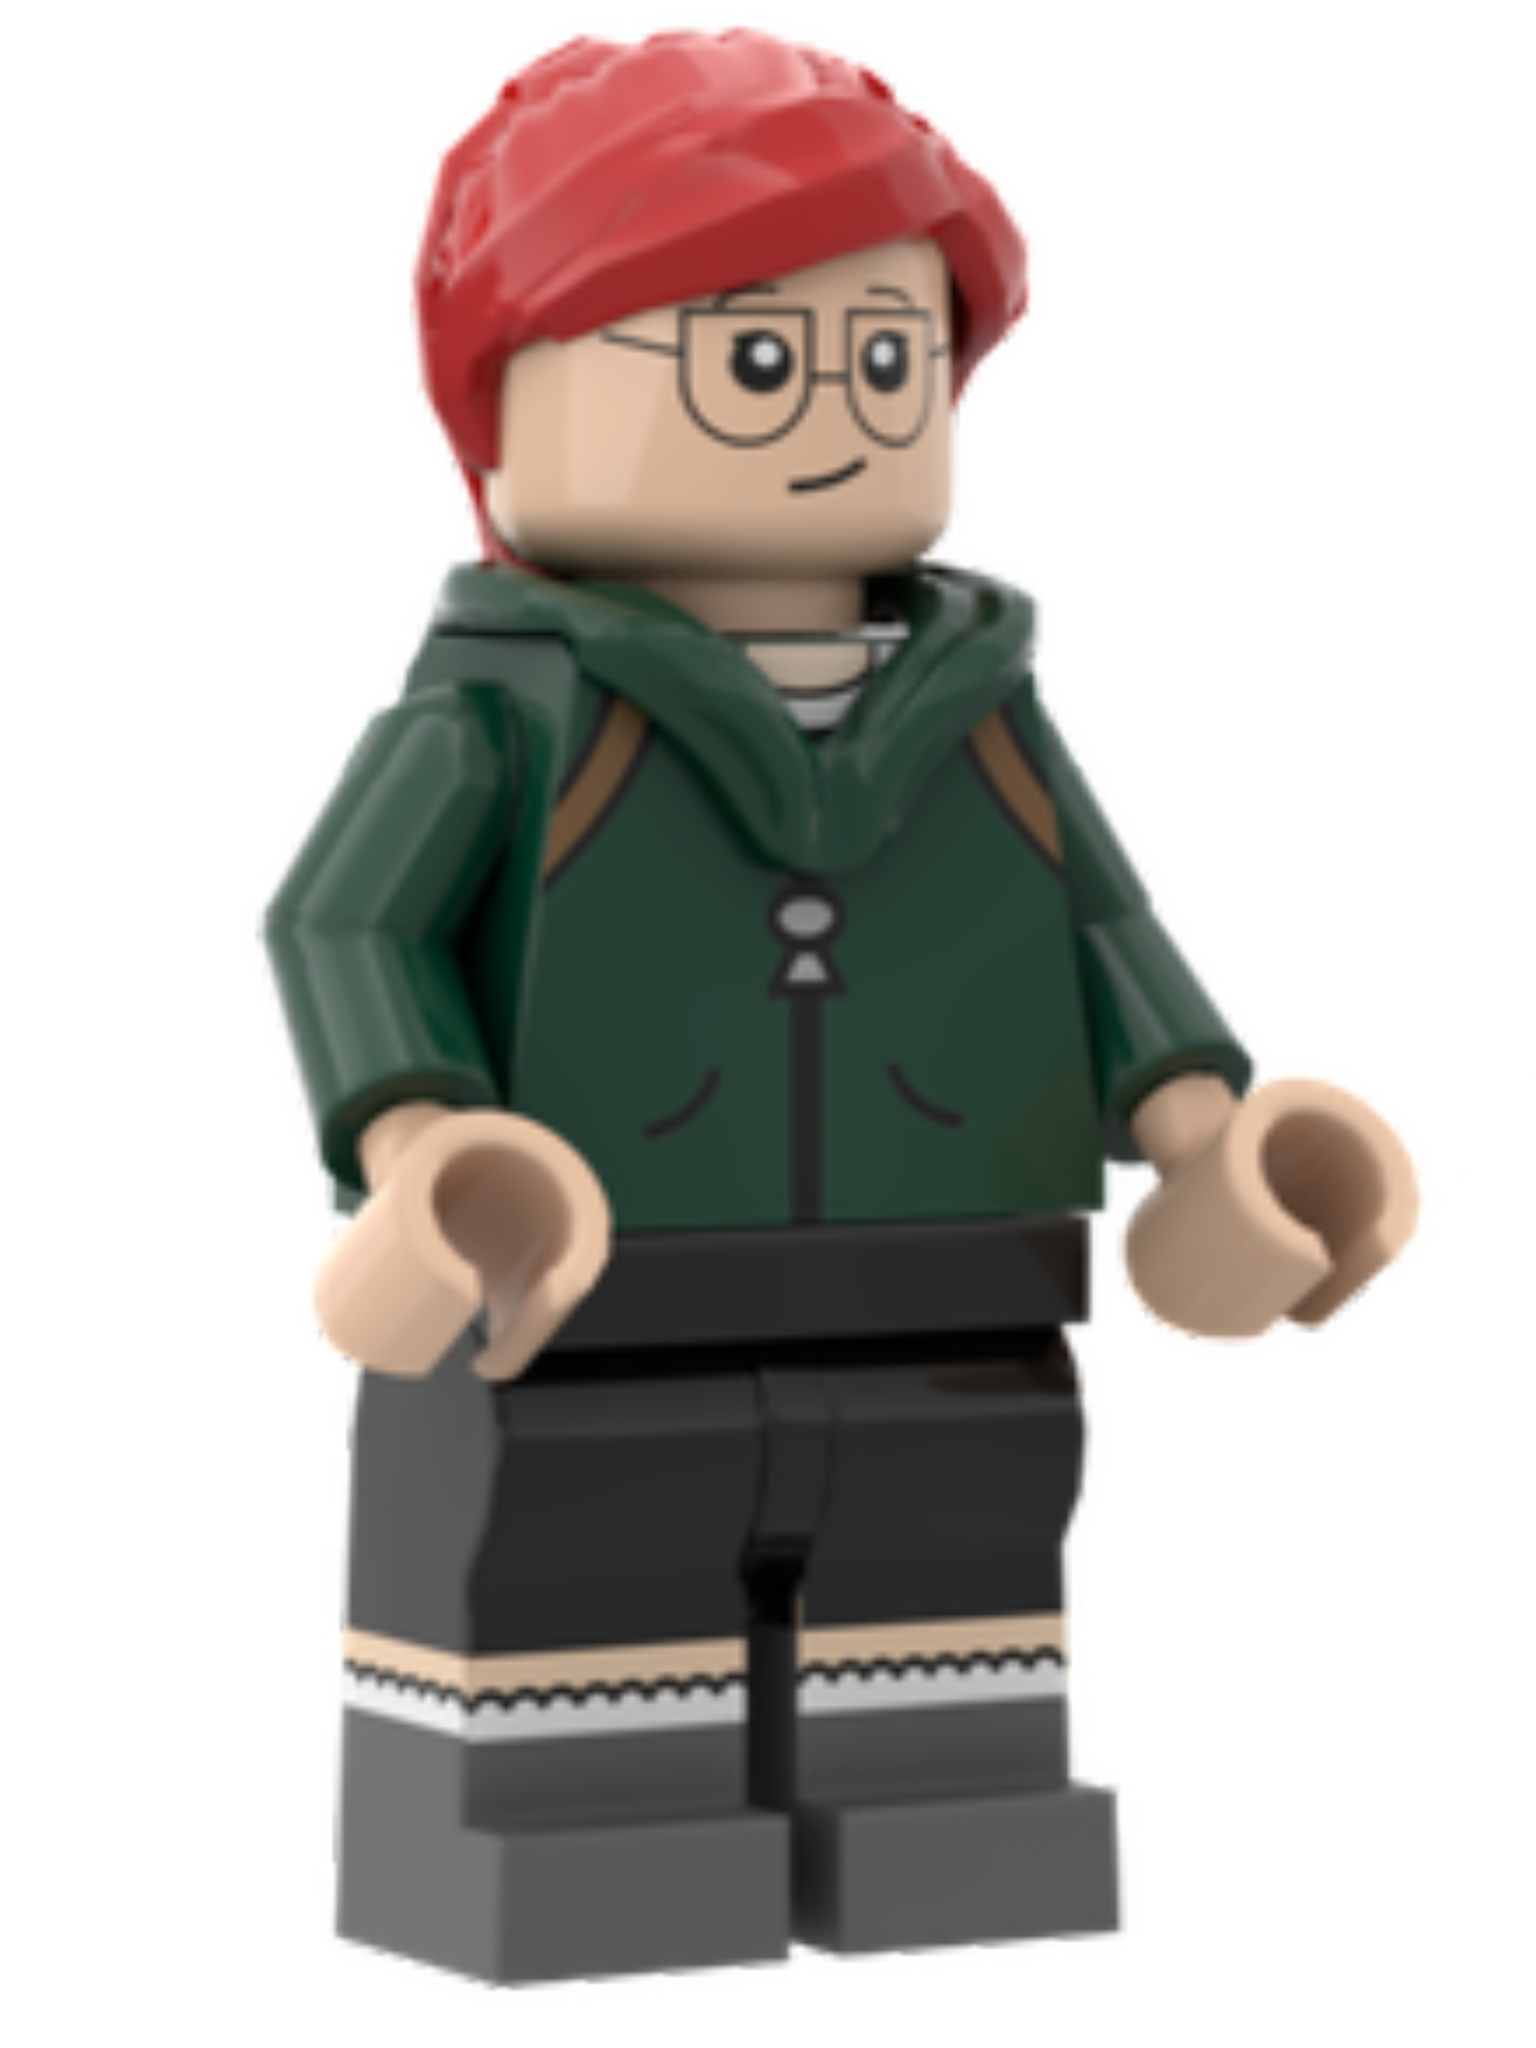 https://static.wikia.nocookie.net/lego-dimensions-customs/images/c/cf/Tulip.png/revision/latest?cb=20200302015010